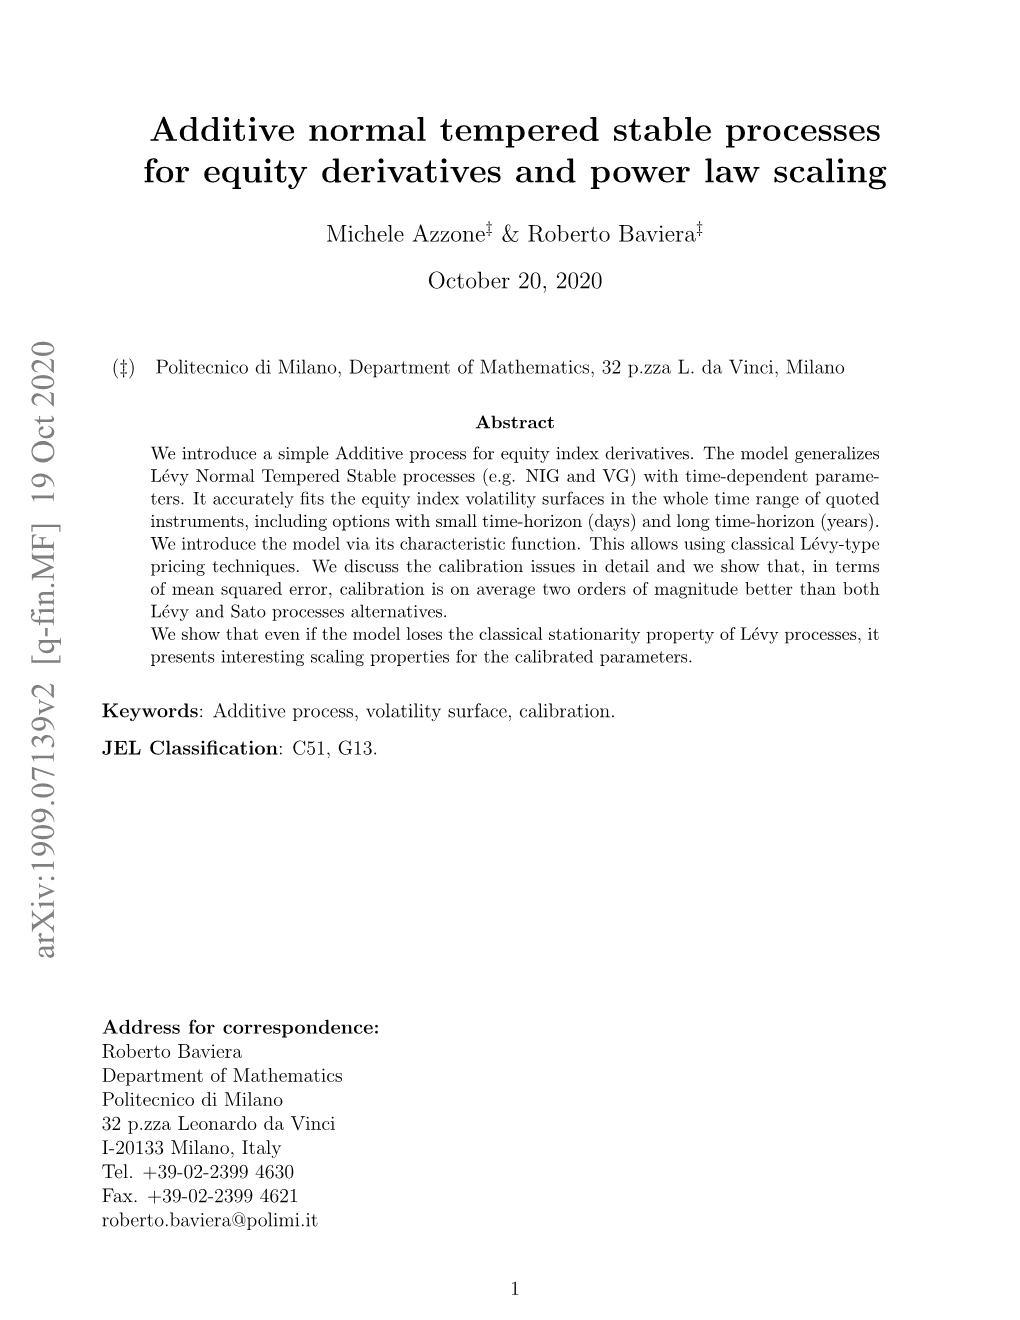 Additive Normal Tempered Stable Processes for Equity Derivatives and Power Law Scaling